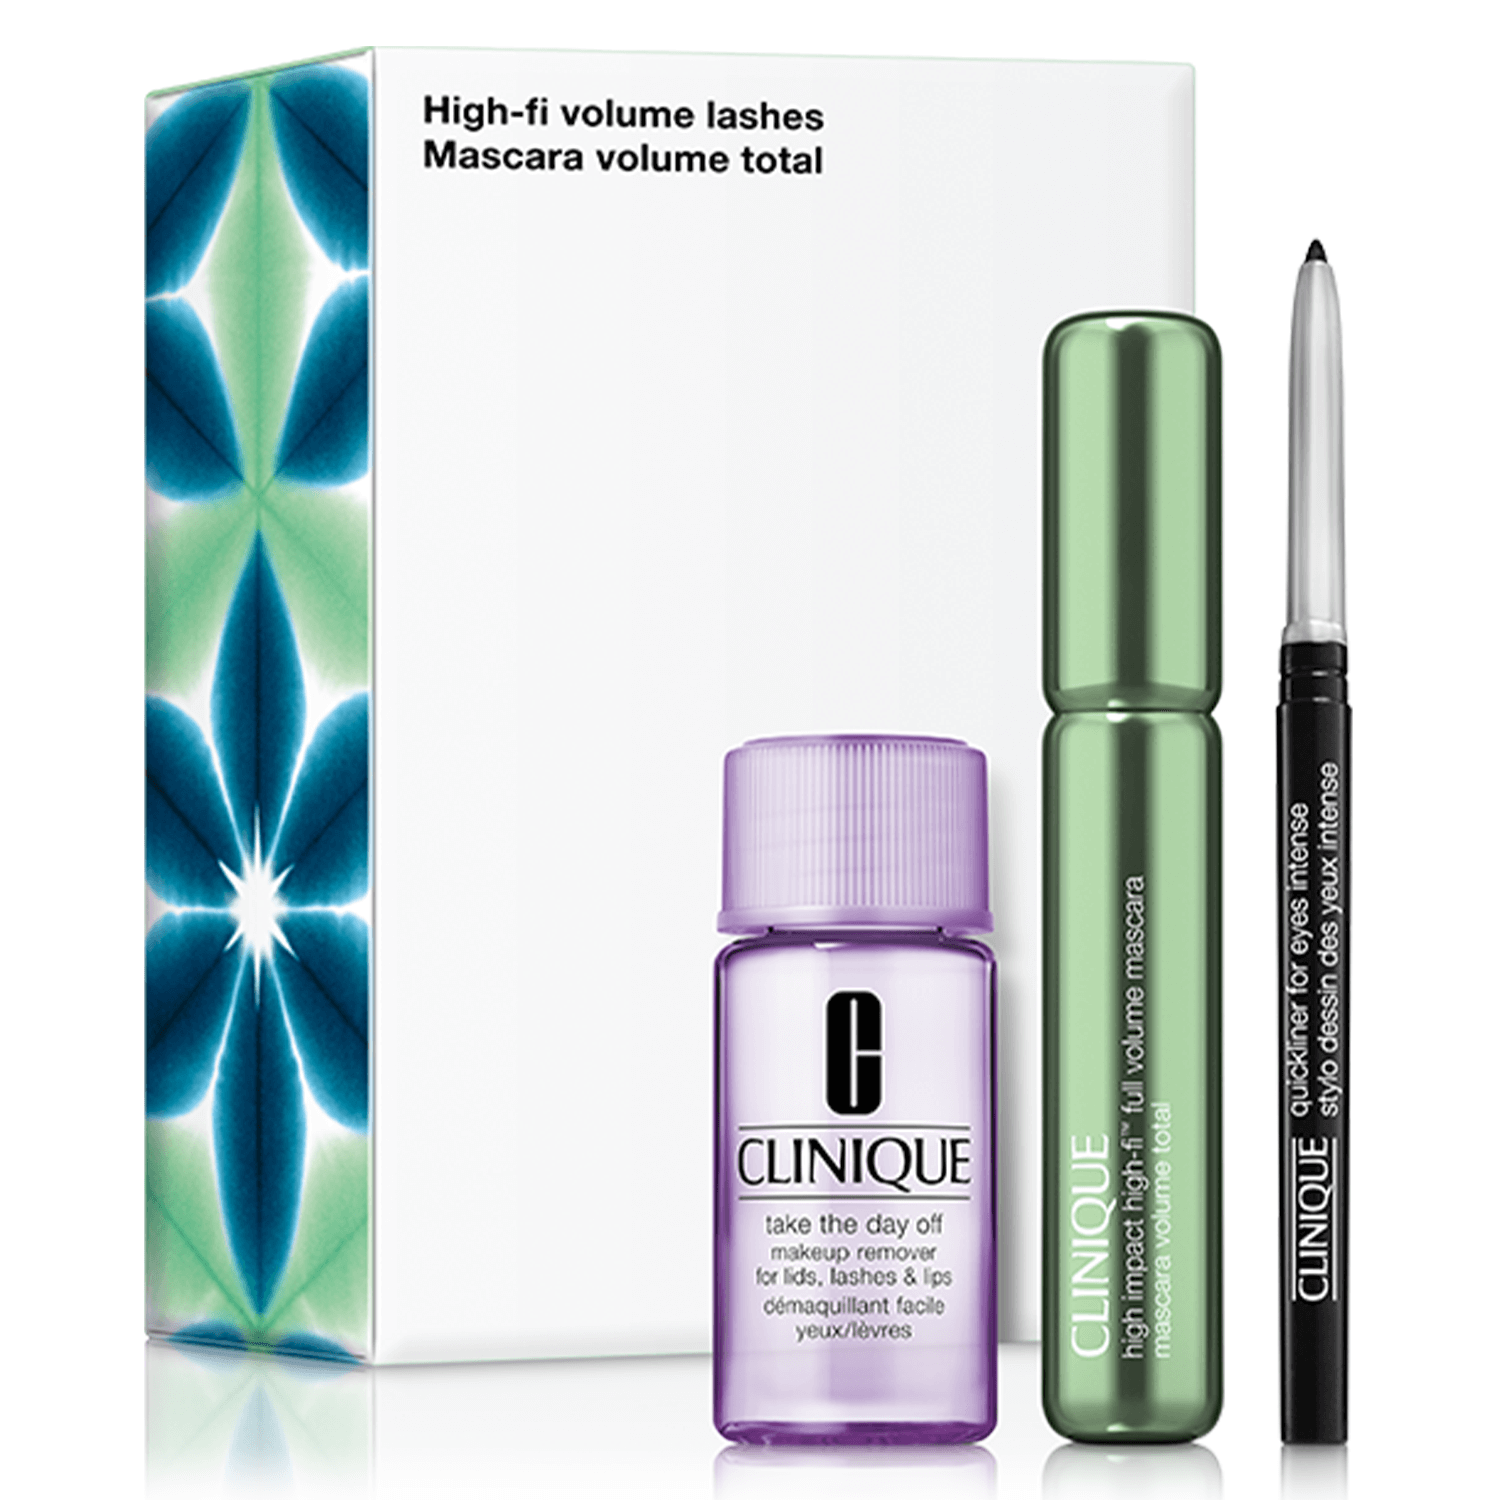 Product image from Clinique Set - High-Fi Volume Lashes Set